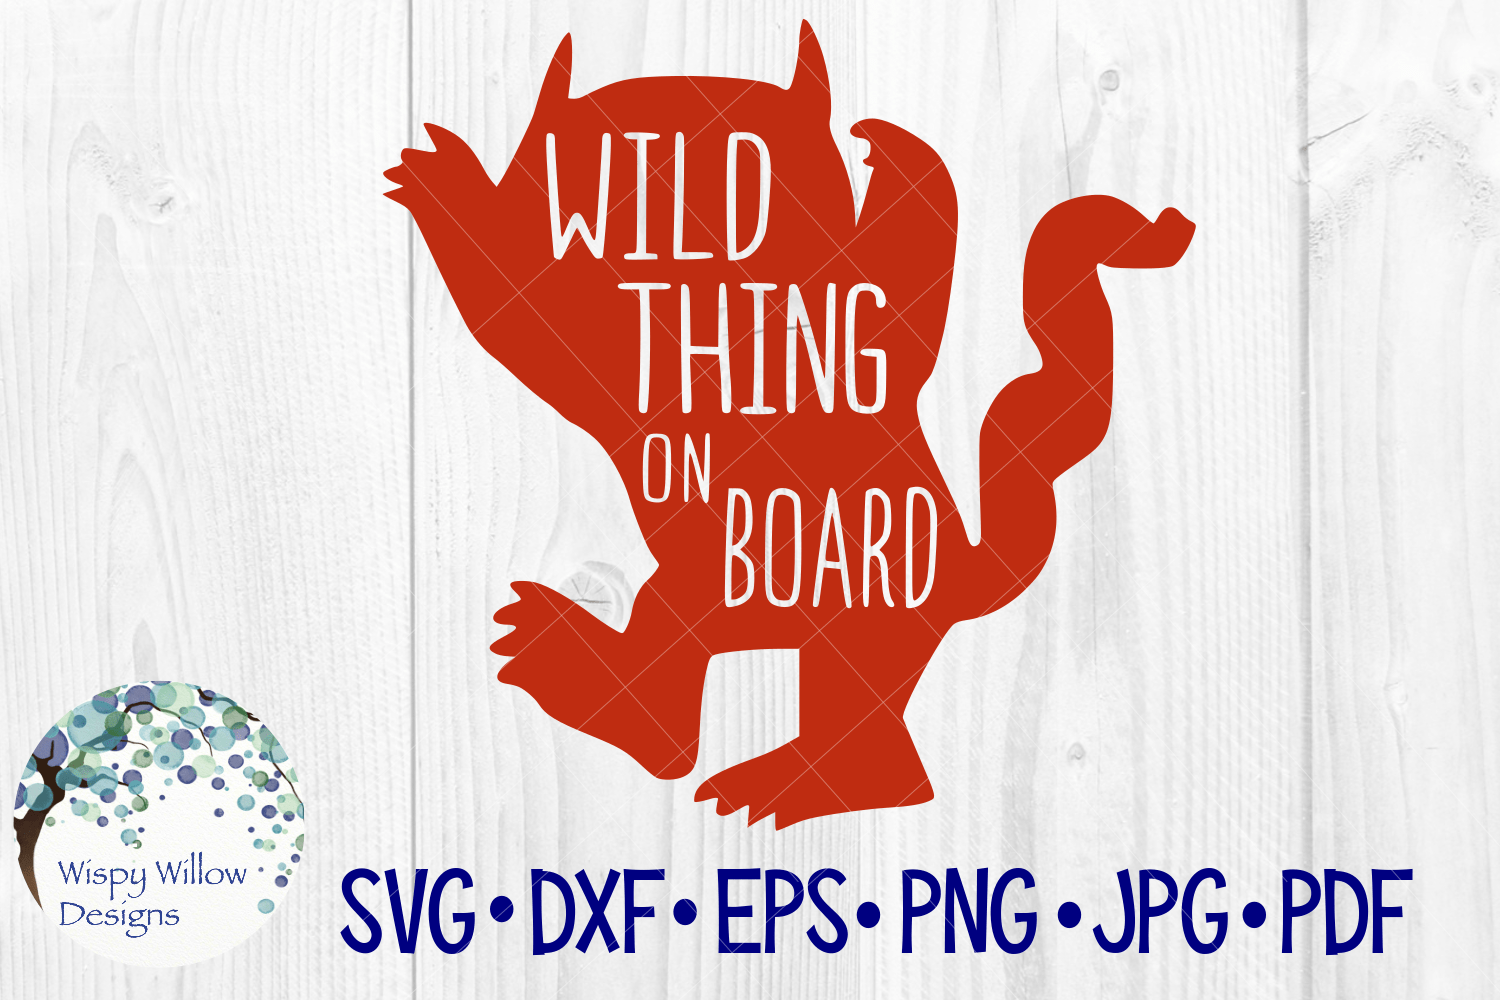 Wild Thing on Board SVG Wispy Willow Designs Company